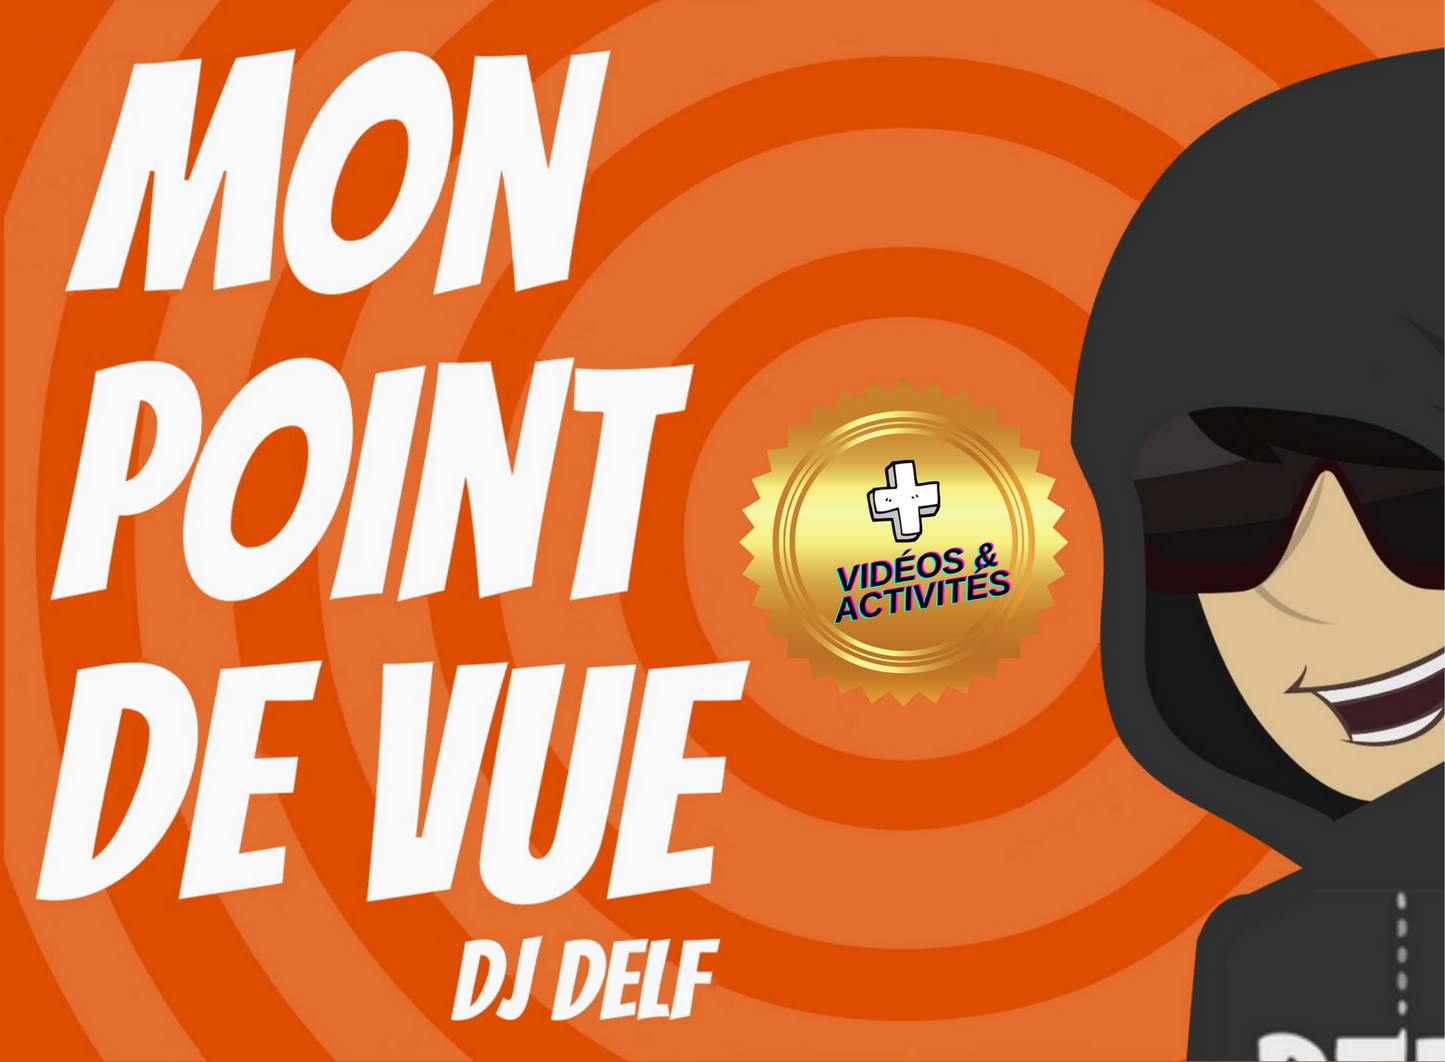 MON POINT DE VUE - DJ DELF Series - IC Reader - Single copy or Class sets of 20 or 30 with FULL FOREVER PLATFORM ACCESS INCLUDED ($135 value)